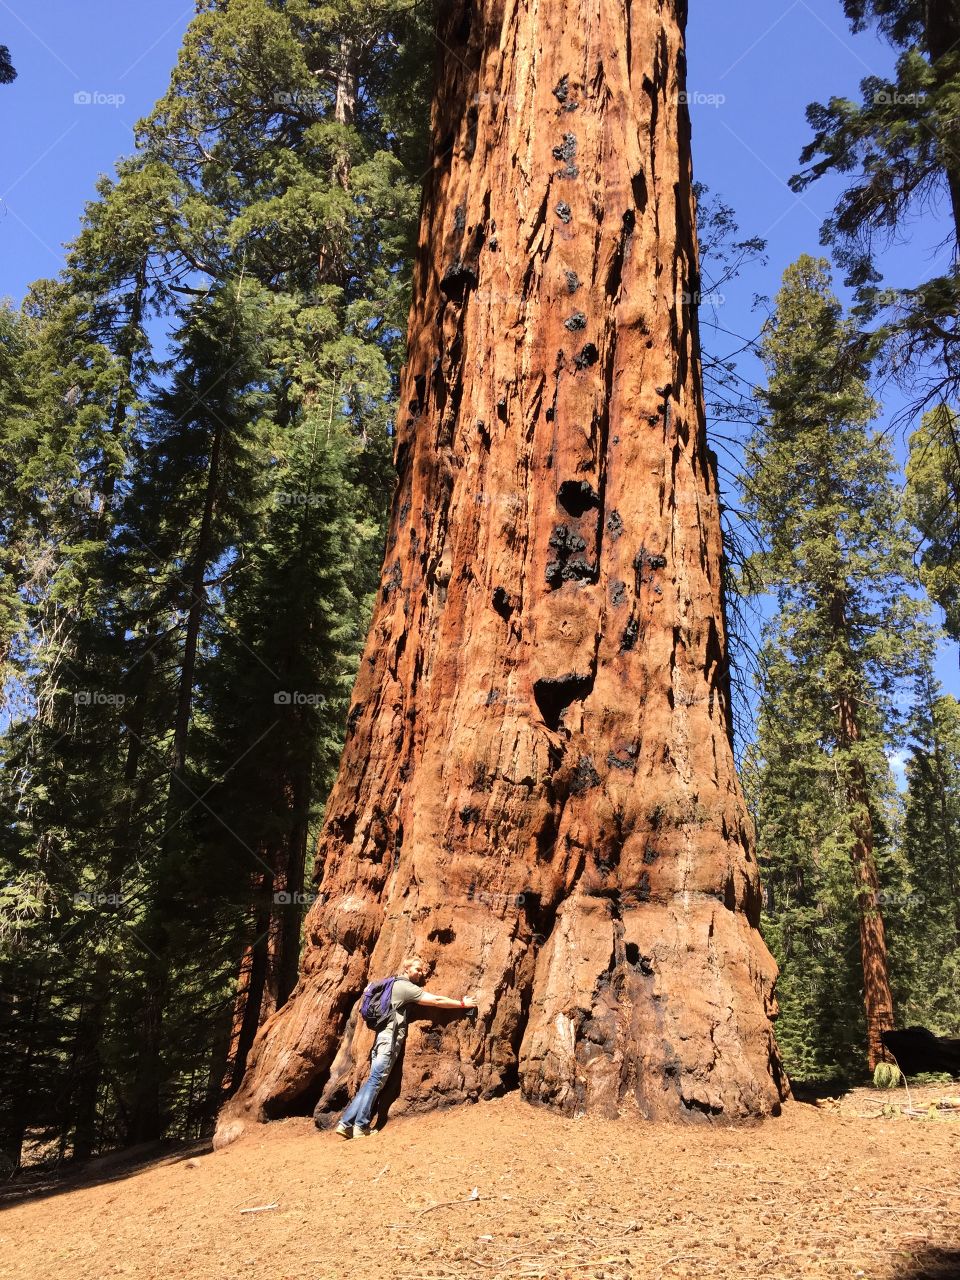 Sequoia. Biggest trees in the world 